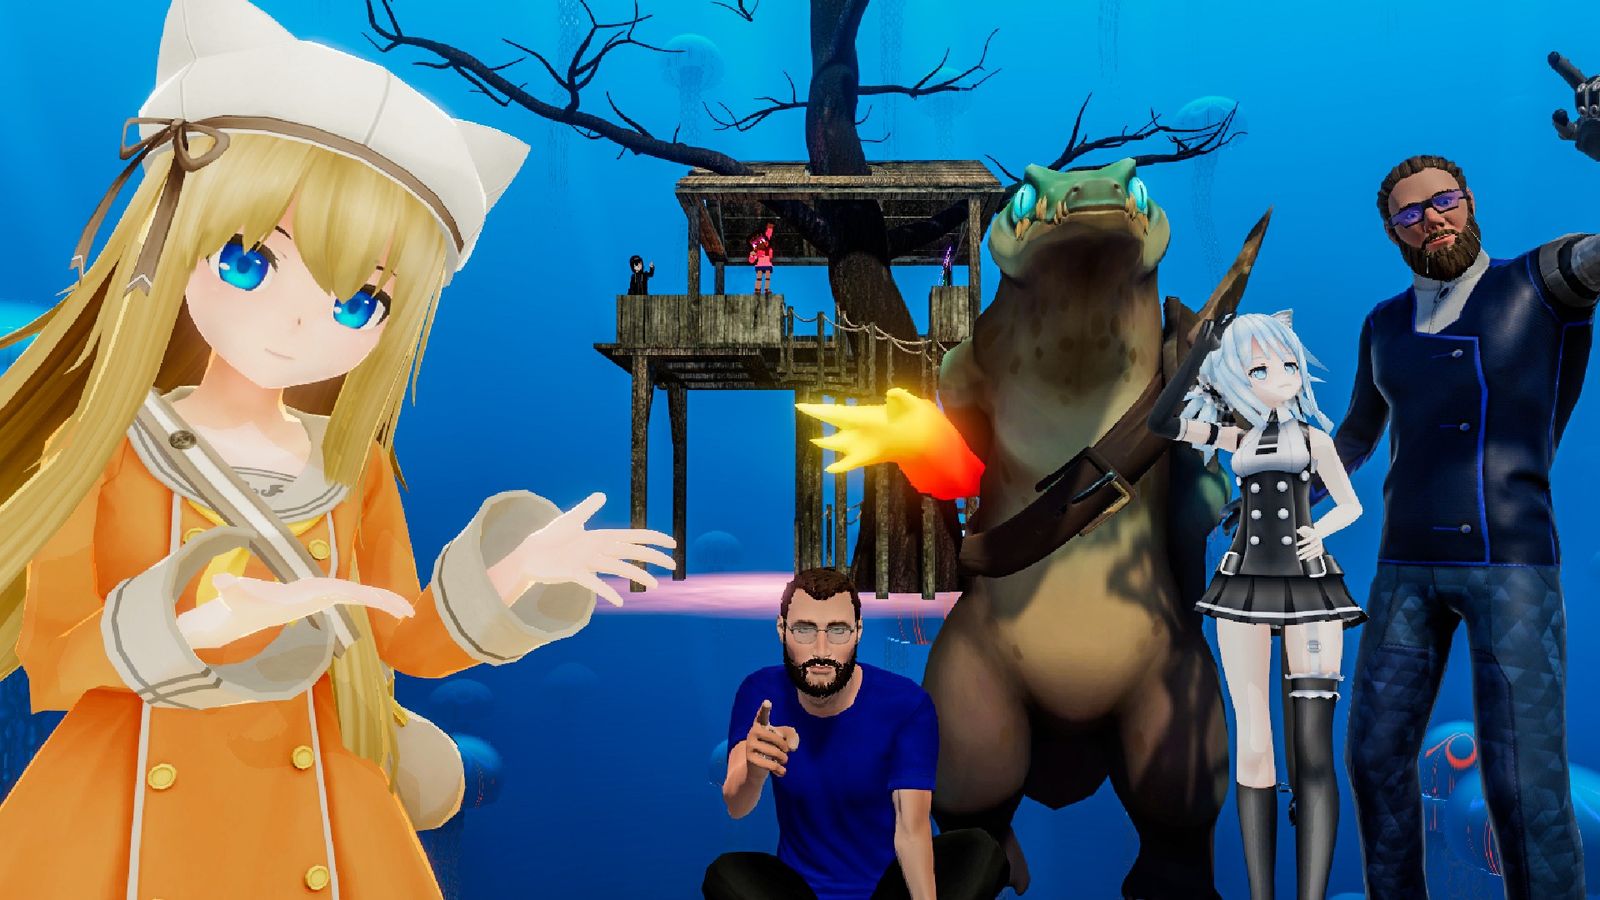 A group of avatars, including anime girls, a reptile-like character, and some dudes standing in a blue space in VRChat